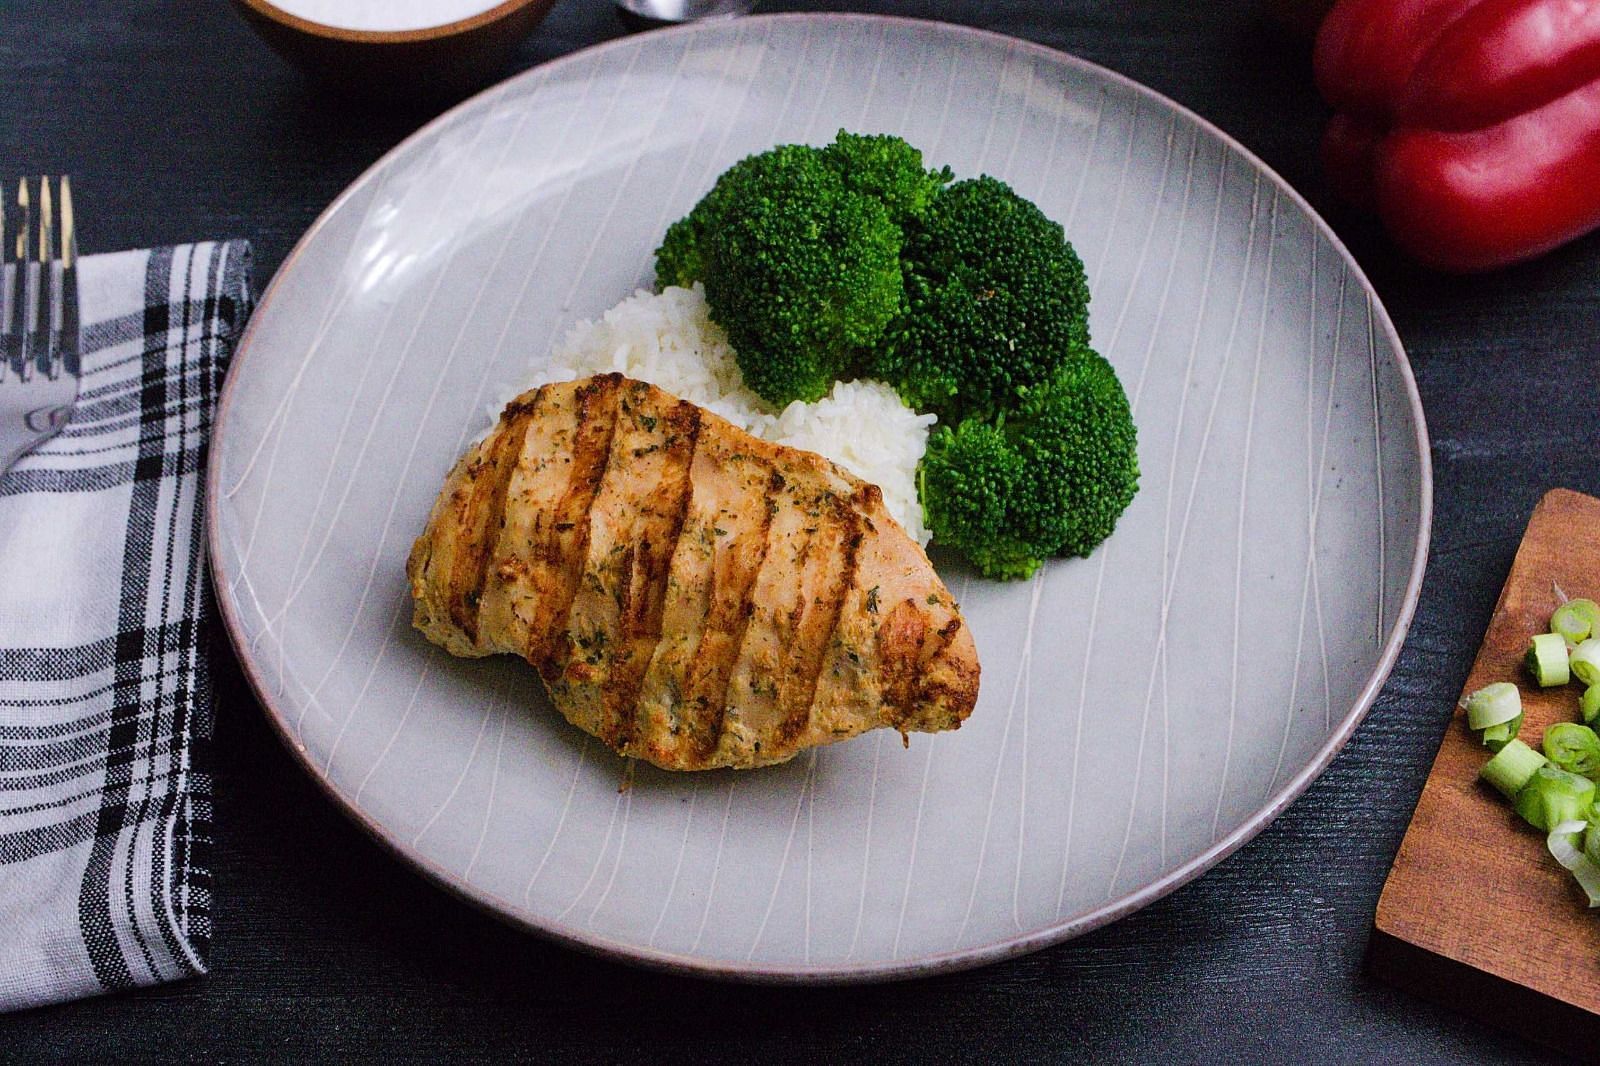 Chicken and broccoli (Image via Getty Images)